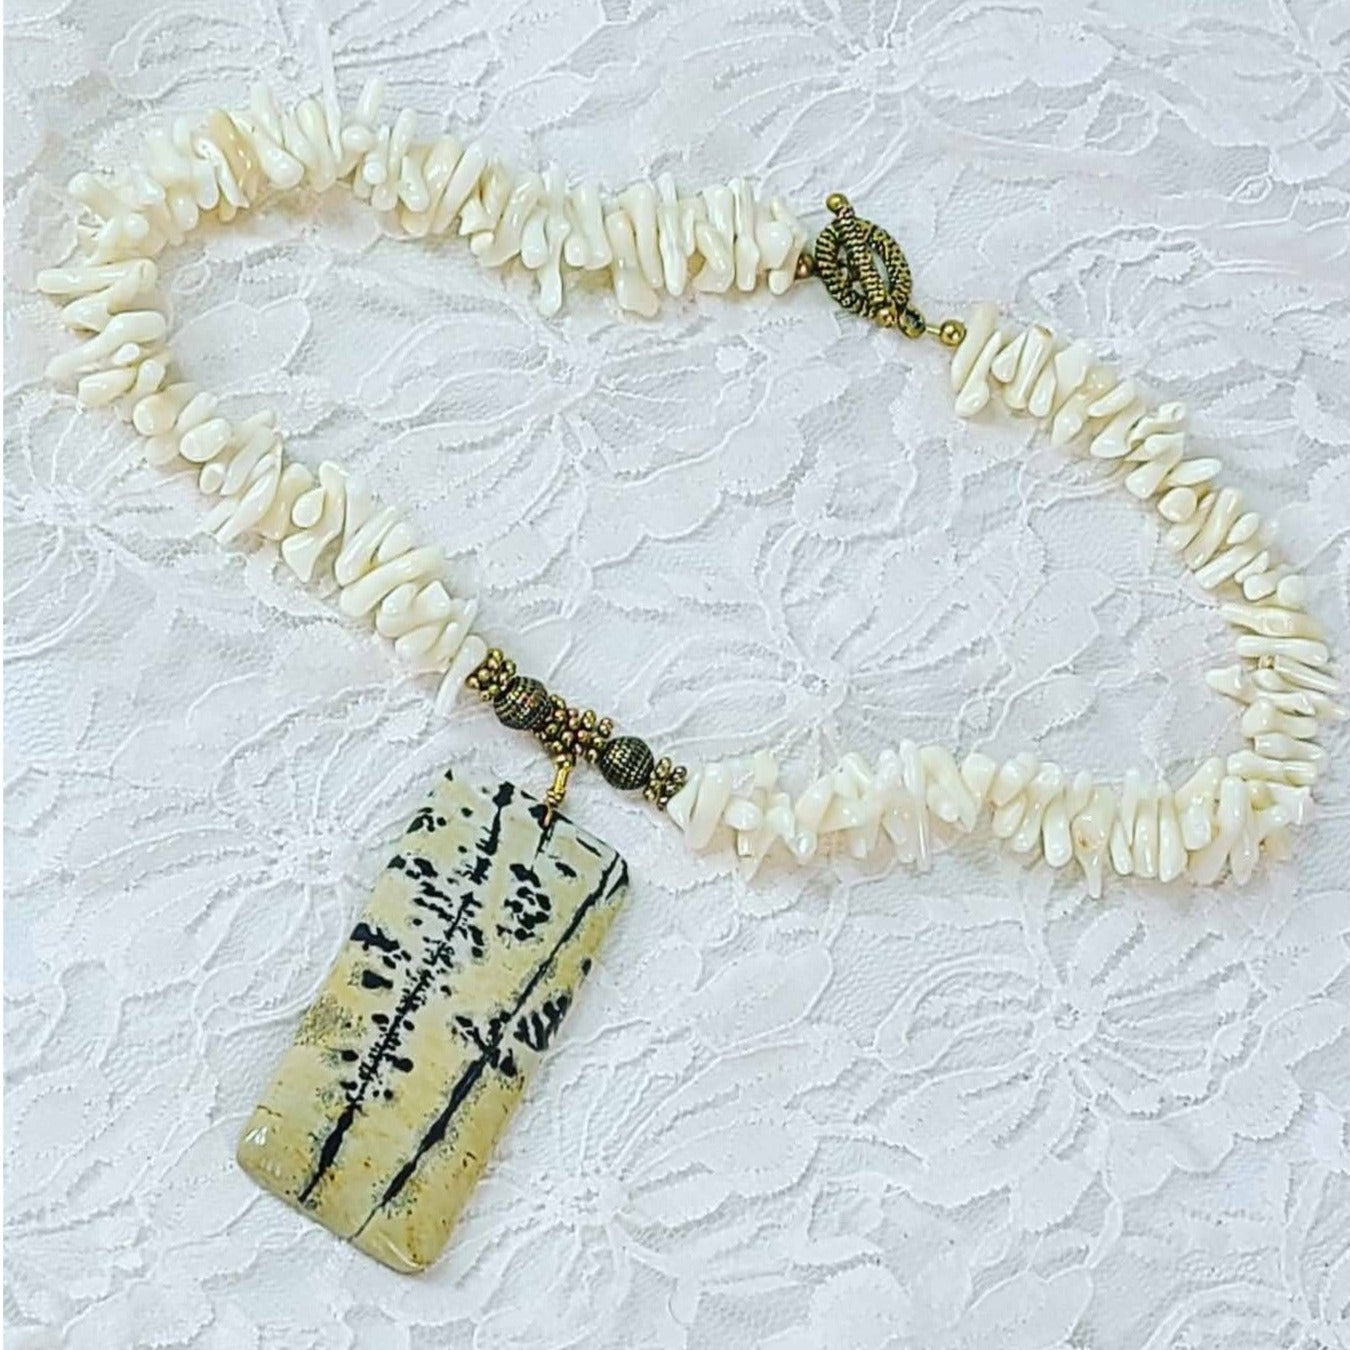 Handmade Necklace ~ Beaded White Coral 18" Neckless w/ Dendritic Agate Pendant ~ Beautiful Handmade OOAK ~ Earth Energy 